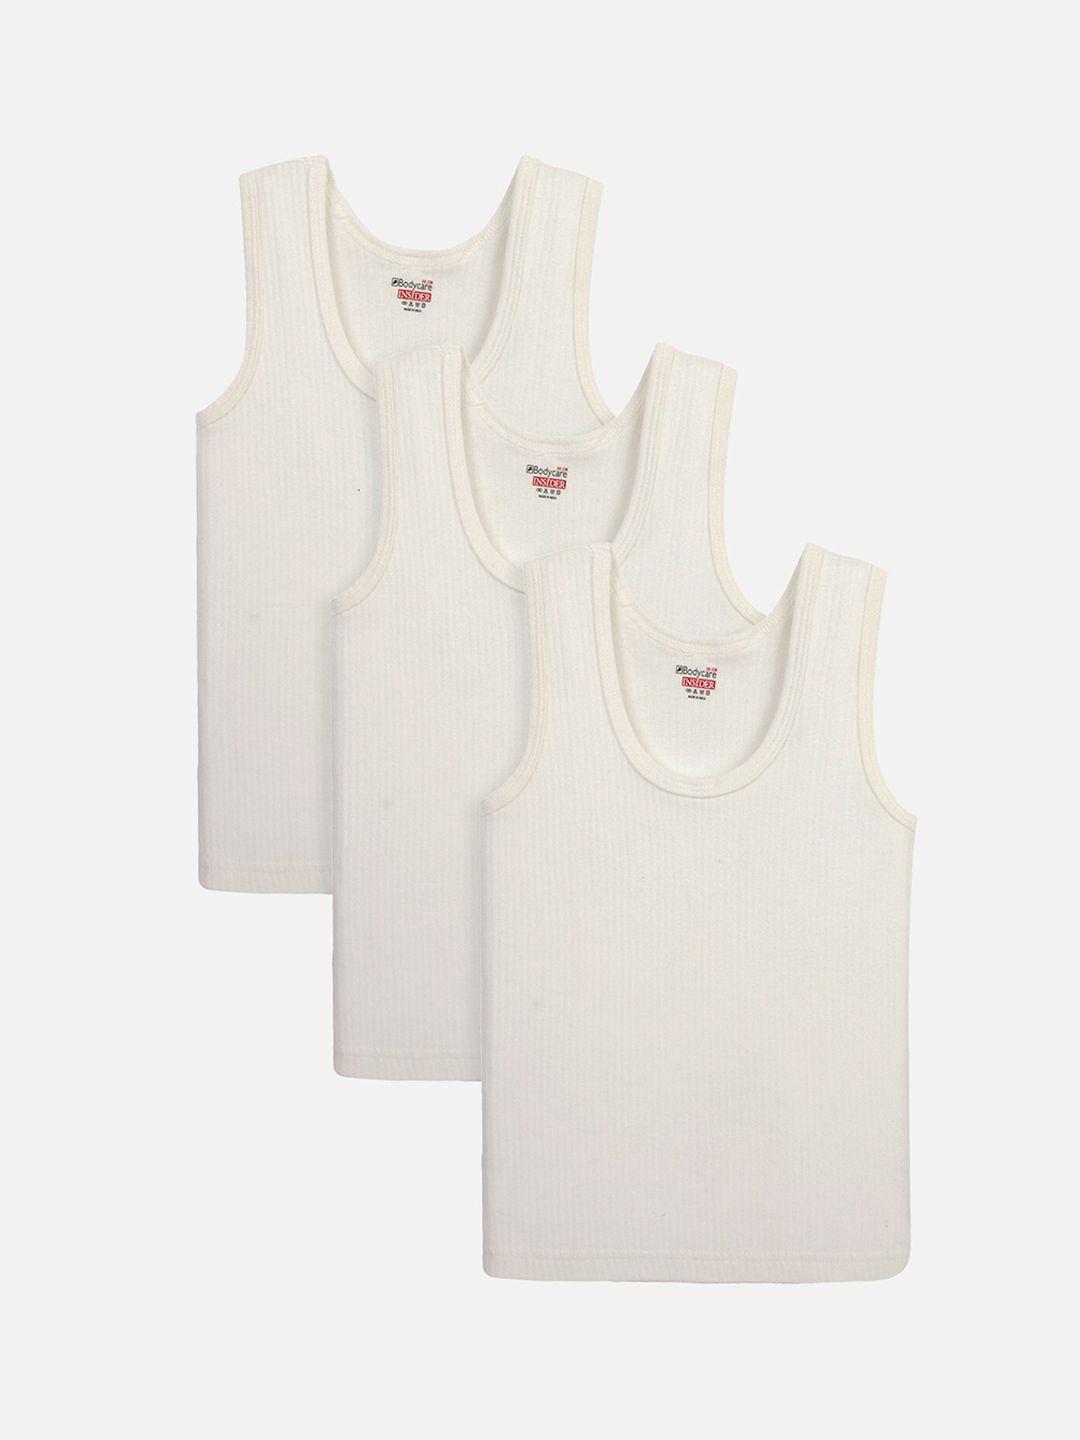 bodycare insider kids pack of 3 white solid cottonthermal top